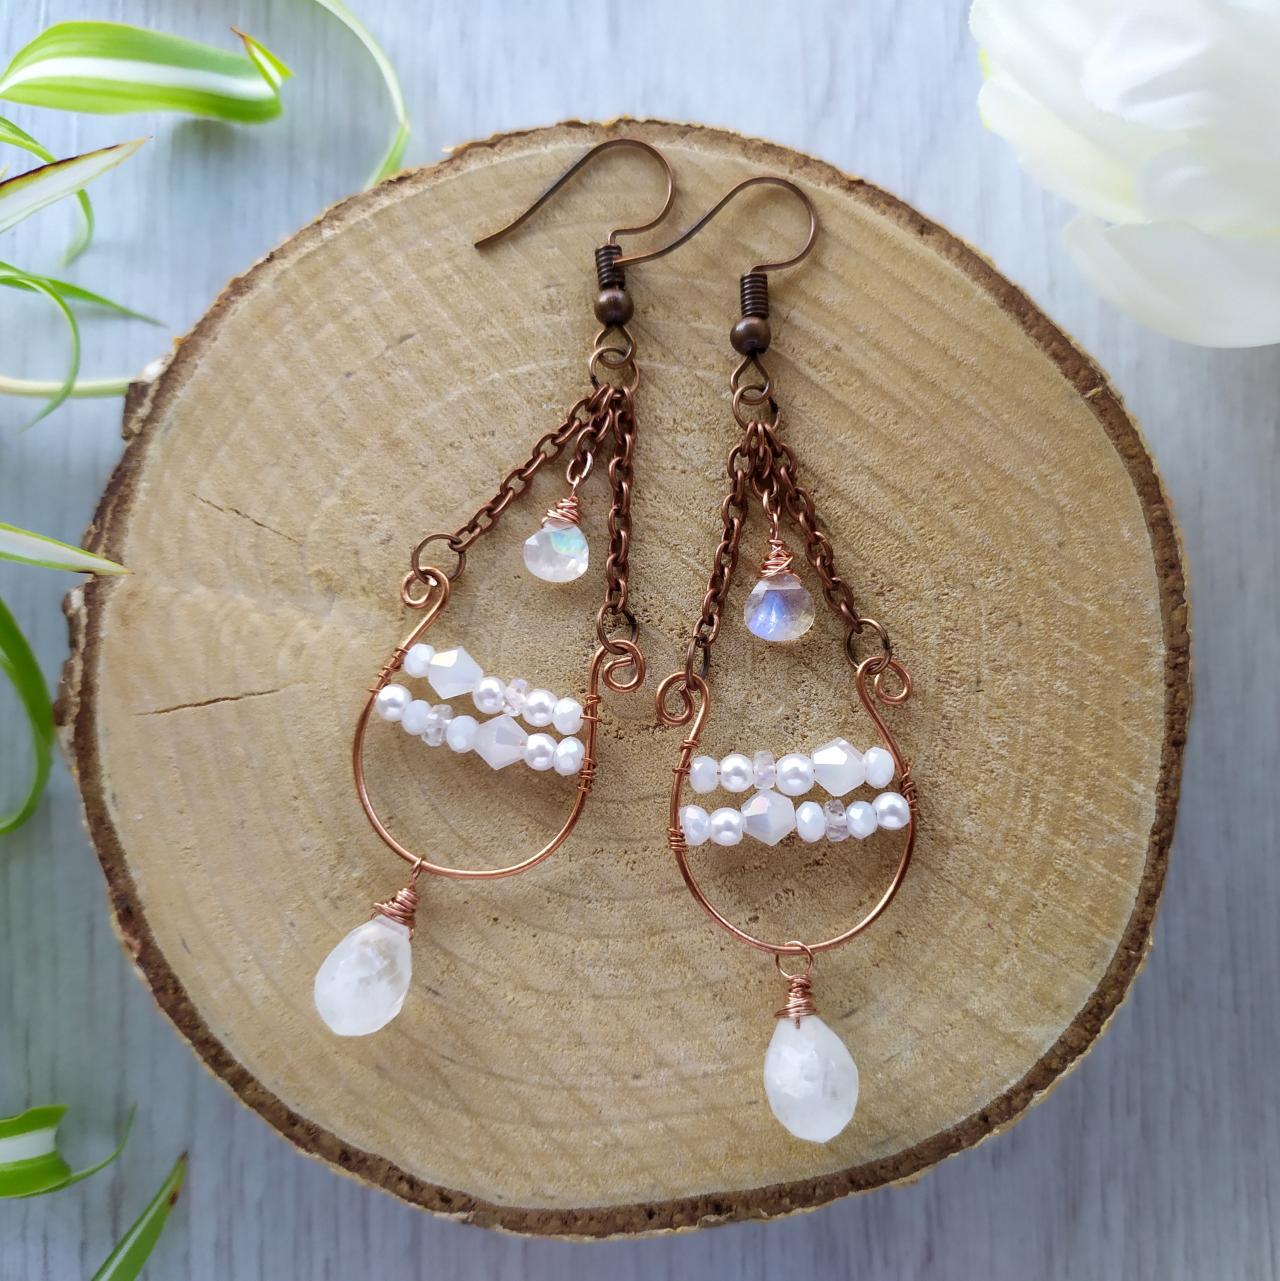 White Wedding Earrings With Rainbow Moonstone Briolette, Dainty Bridal Copper Earrings With Gemstone, Rainbow Moonstone Chandelier Earrings